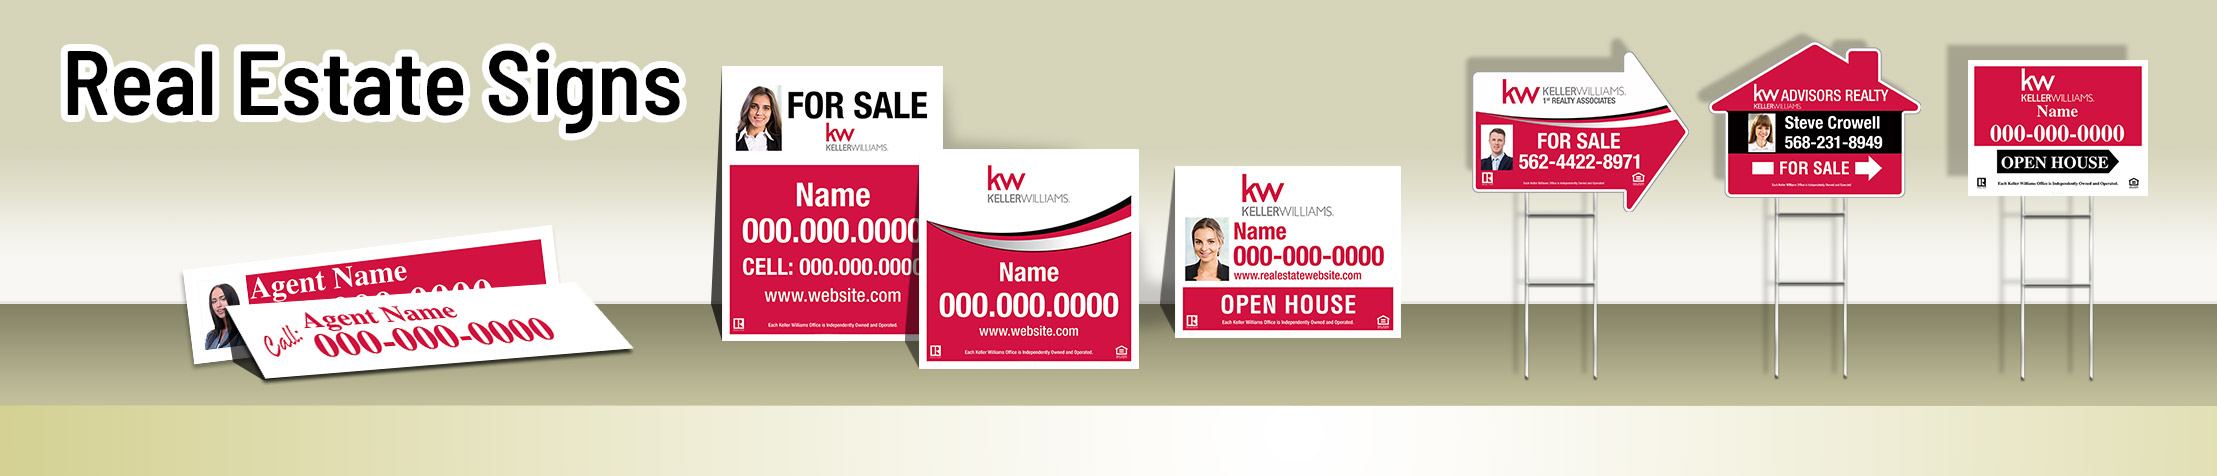 Keller Williams Real Estate Signs - KW real estate signs - H-Frame Units, Directional Signs, A-Frame Units, Yard Post and Panel | Sparkprint.com